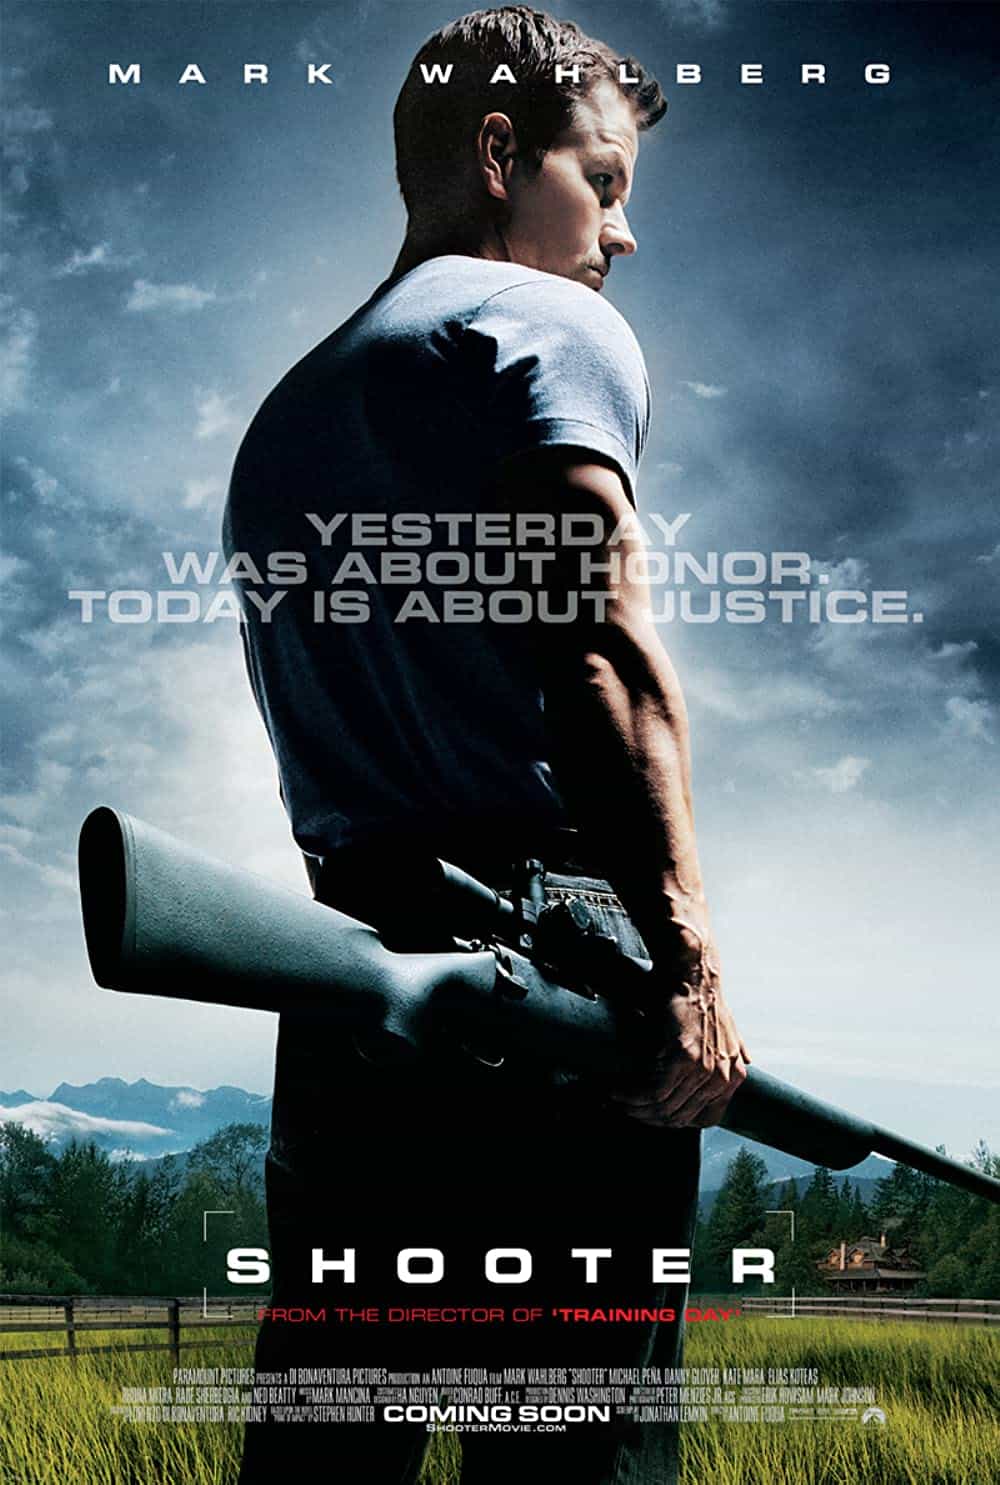 Shooter (2007) Best Special Forces Movies You Can't Miss